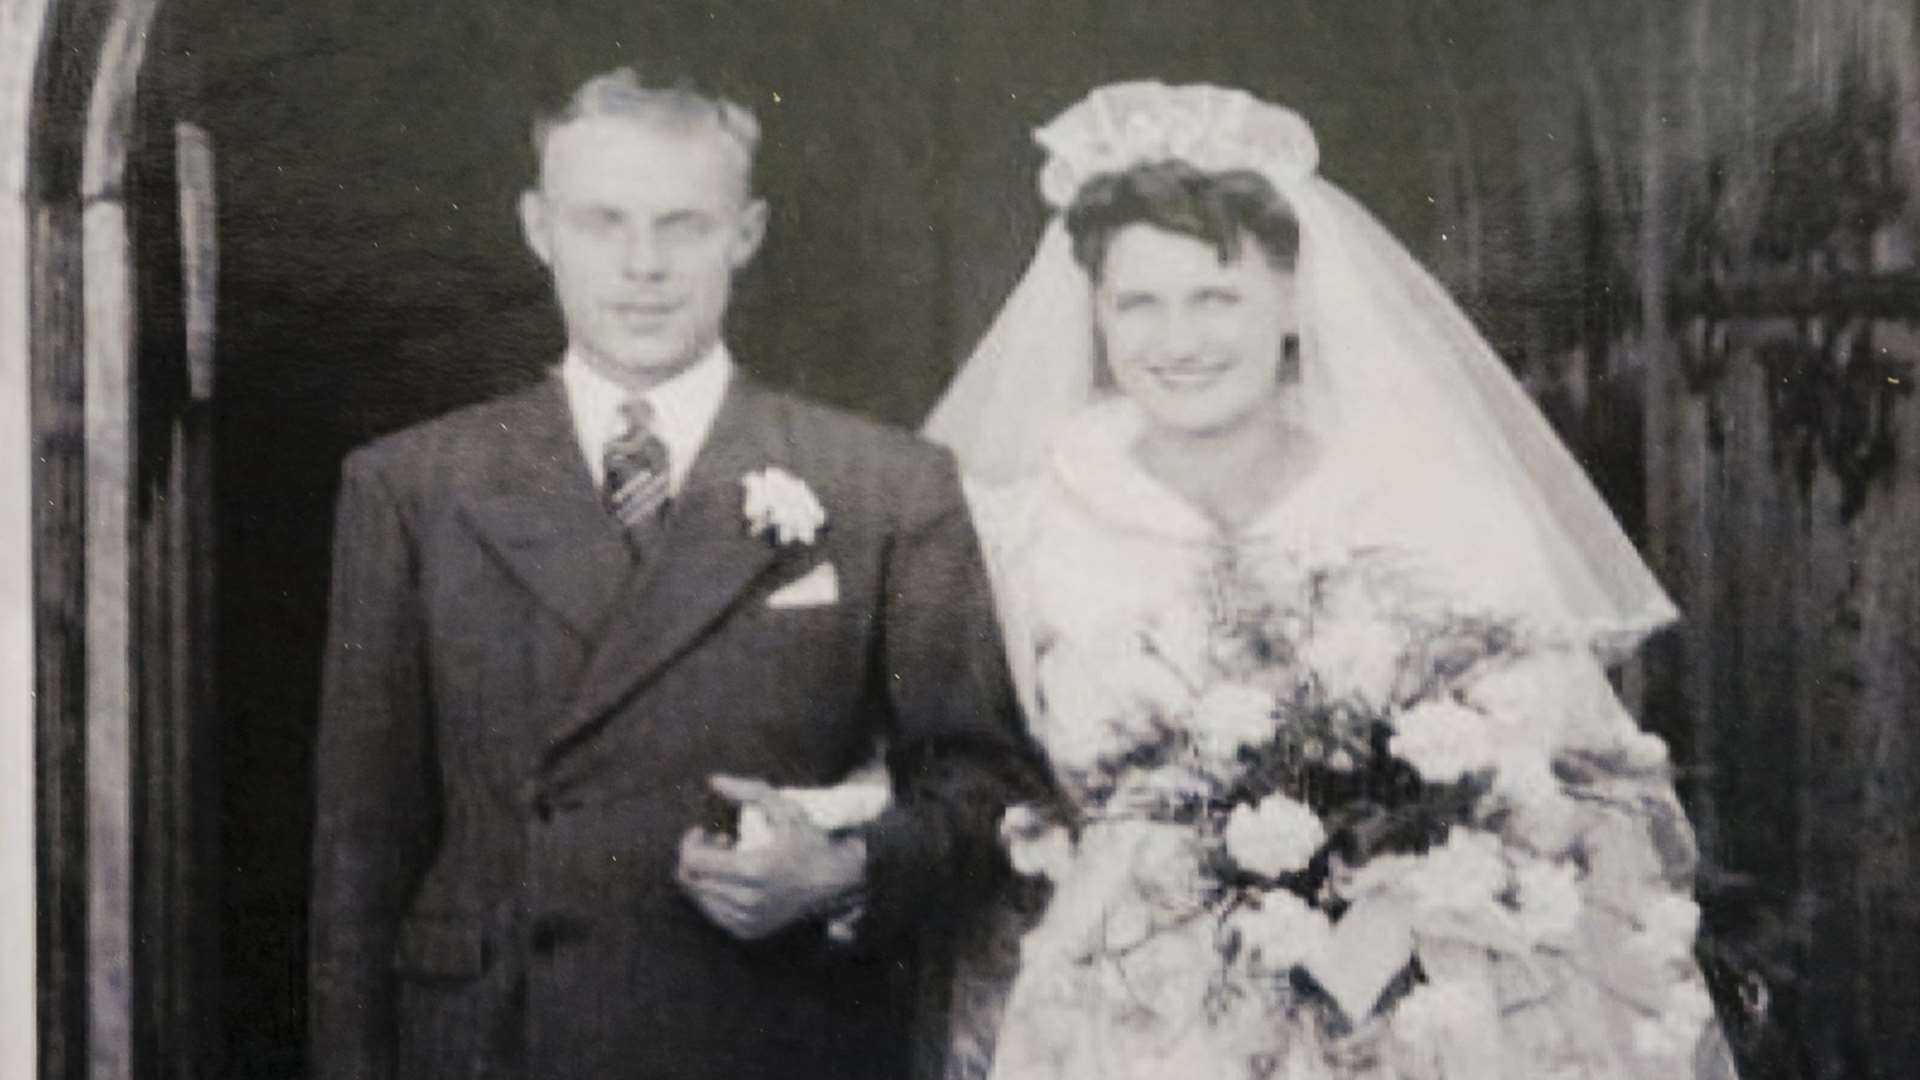 Peter and Dora on their wedding day